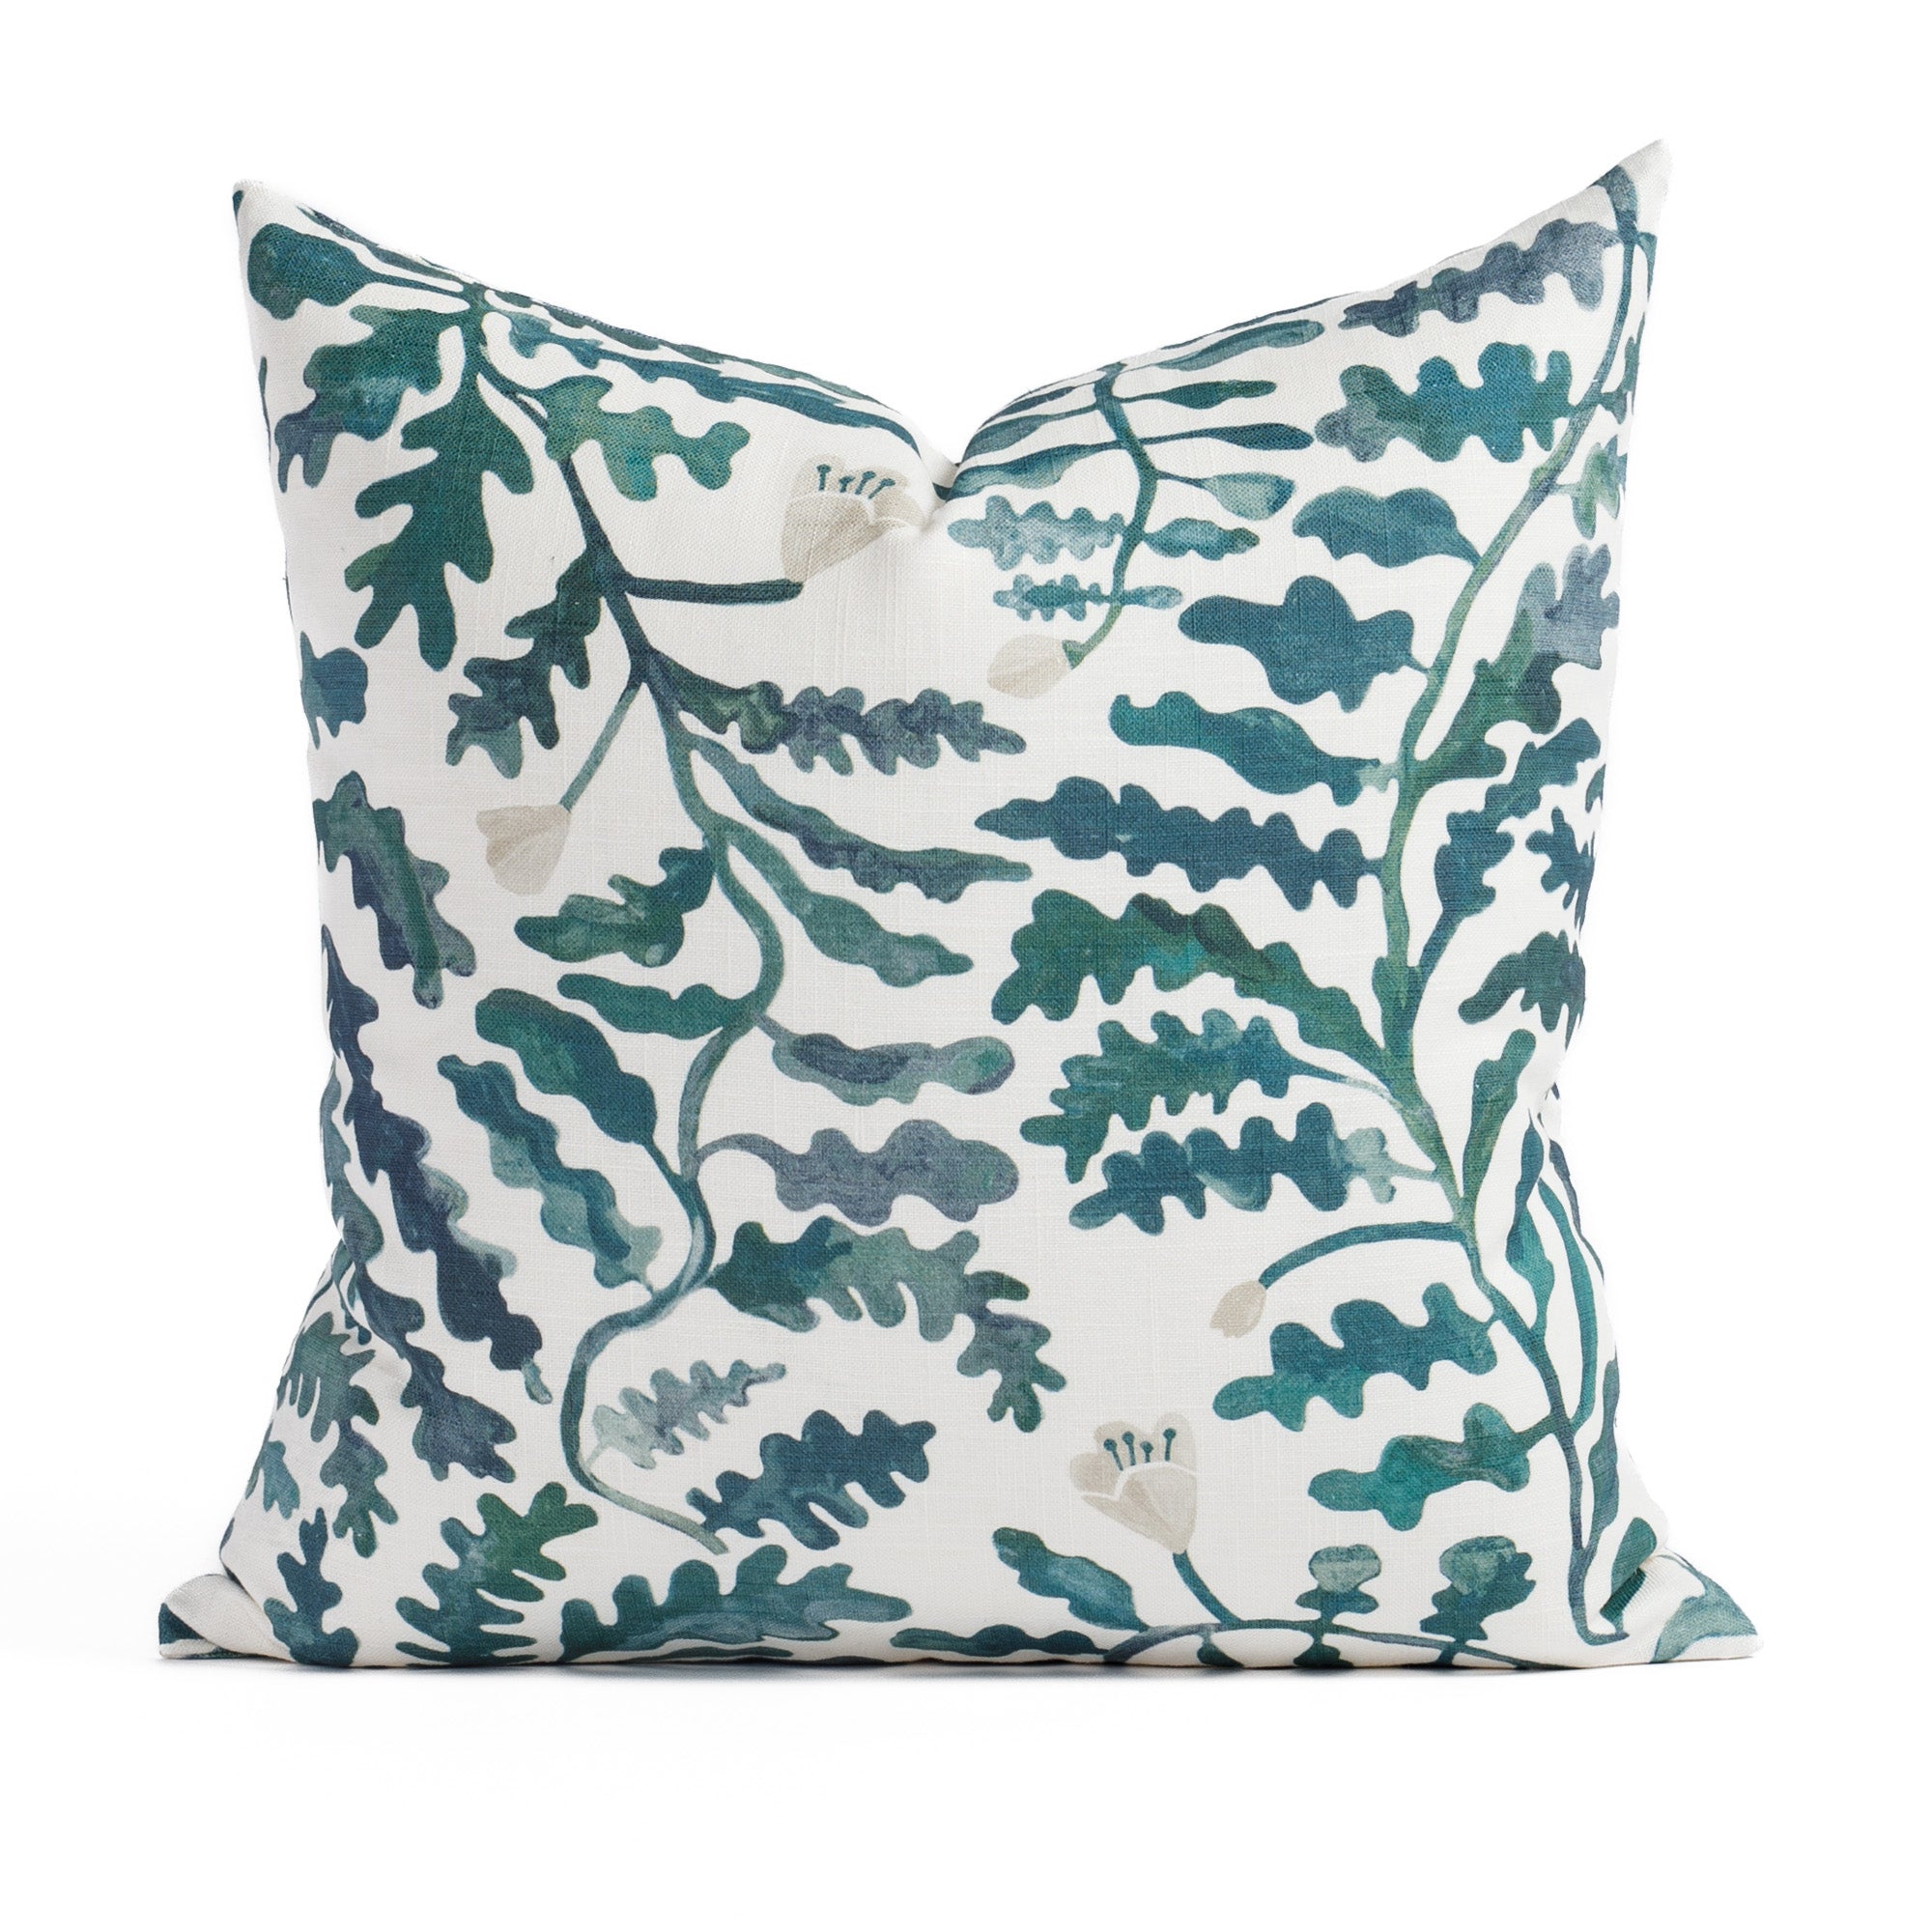 Lola 20x20 Pillow, a green and white leafy botanical pillow from Tonic Living